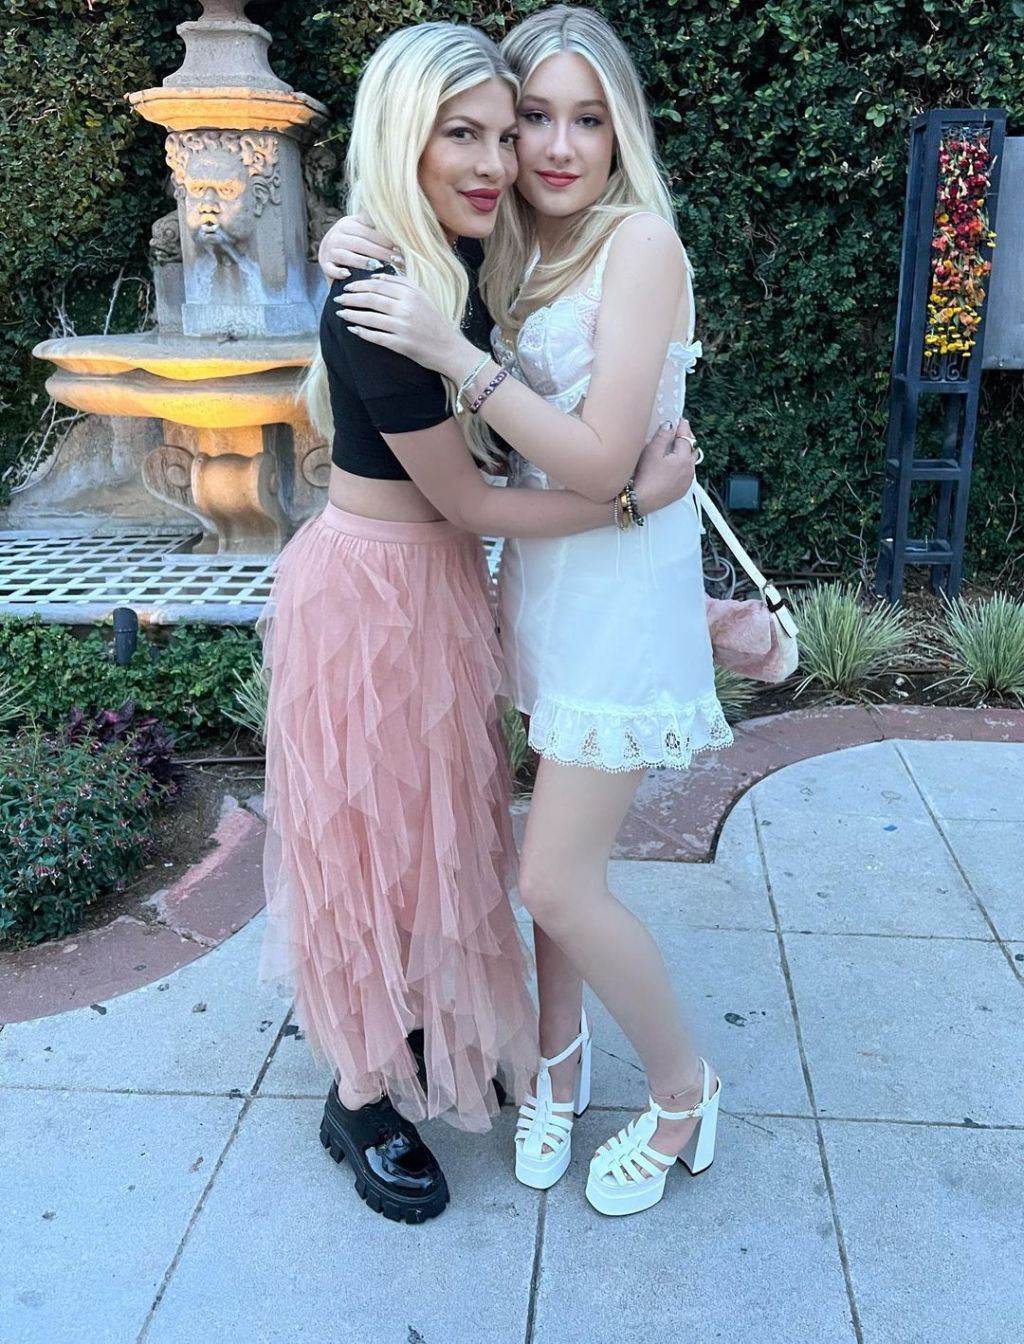 Tori Spelling: My daughter Stella, 15, was ‘shamed’ for living in RV, classmates thought she was homeless